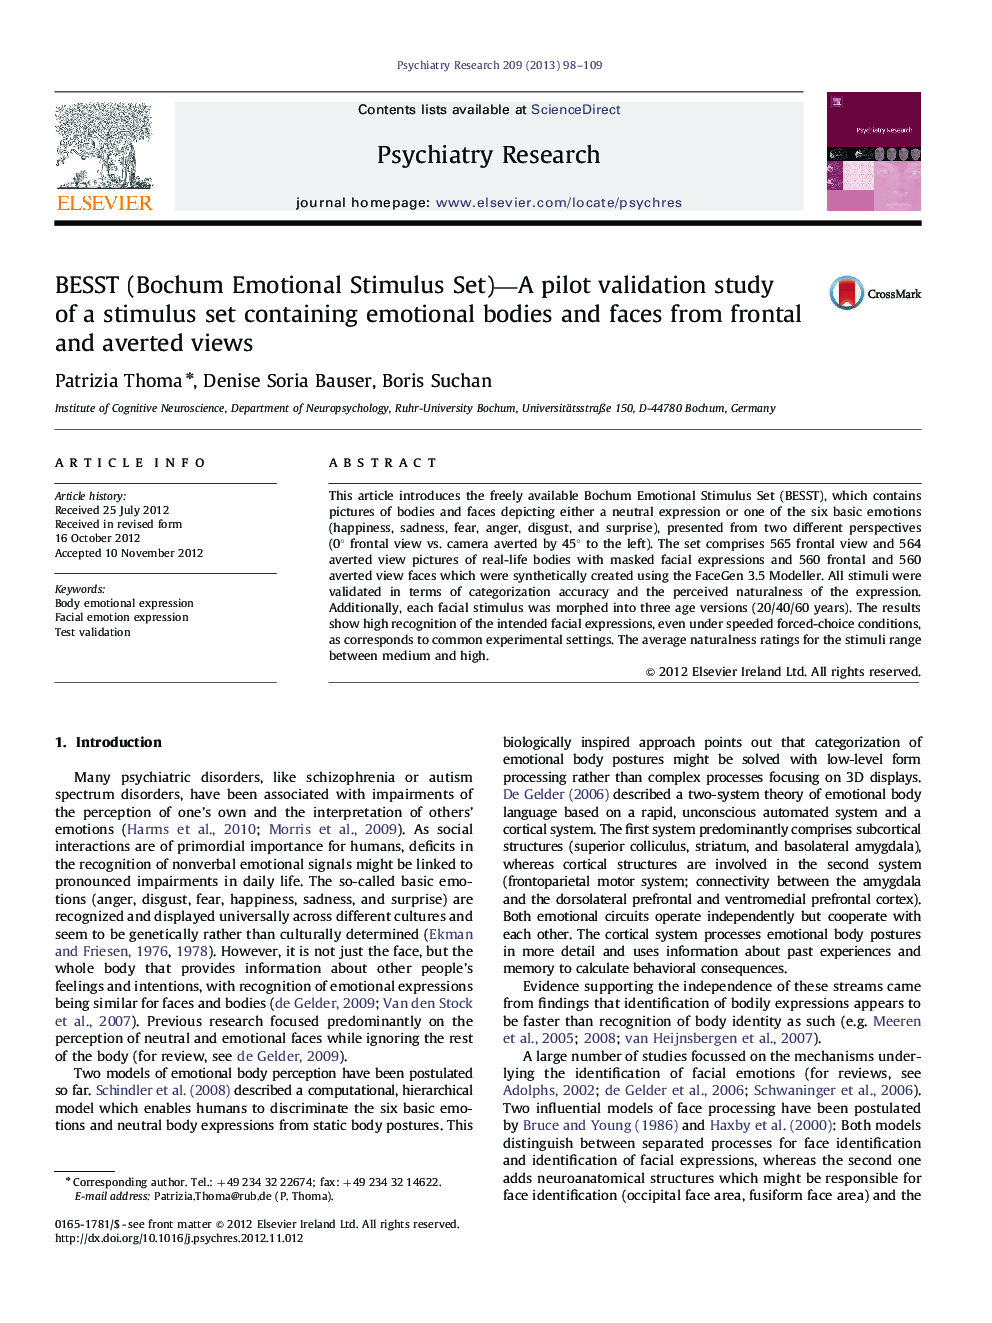 BESST (Bochum Emotional Stimulus Set)-A pilot validation study of a stimulus set containing emotional bodies and faces from frontal and averted views